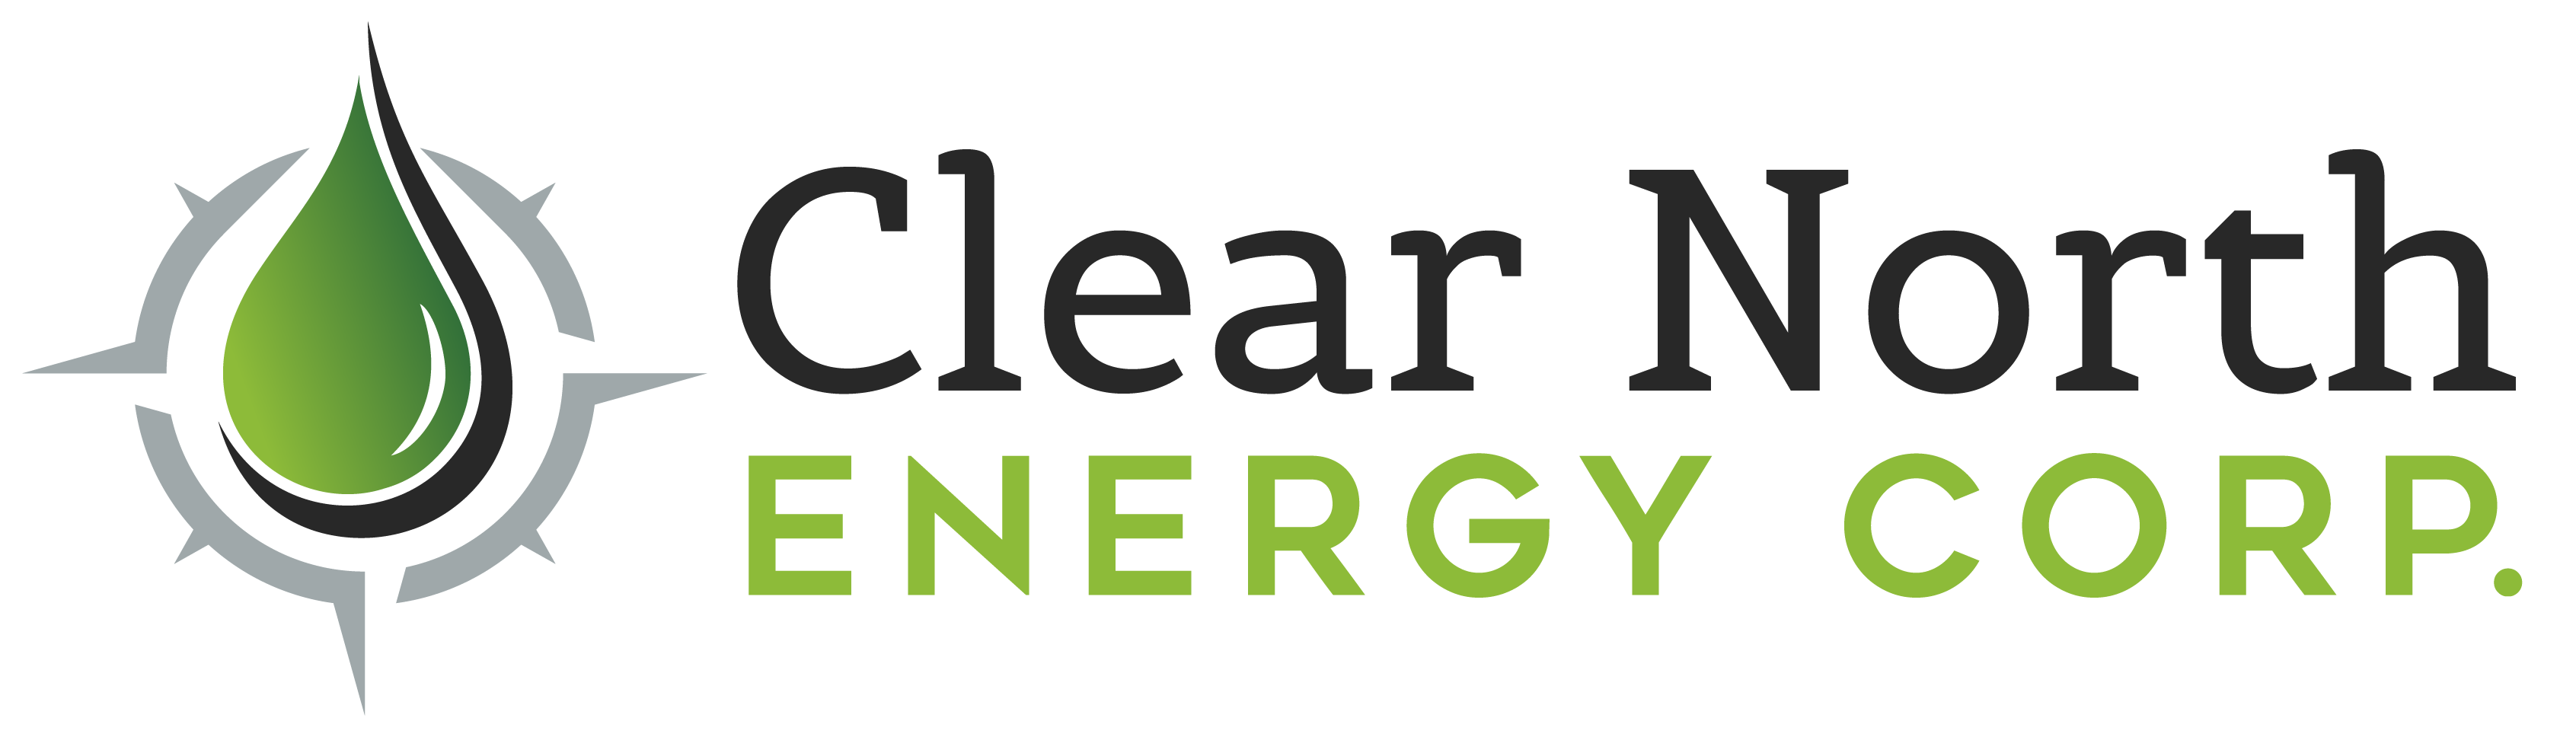 Clear North Energy